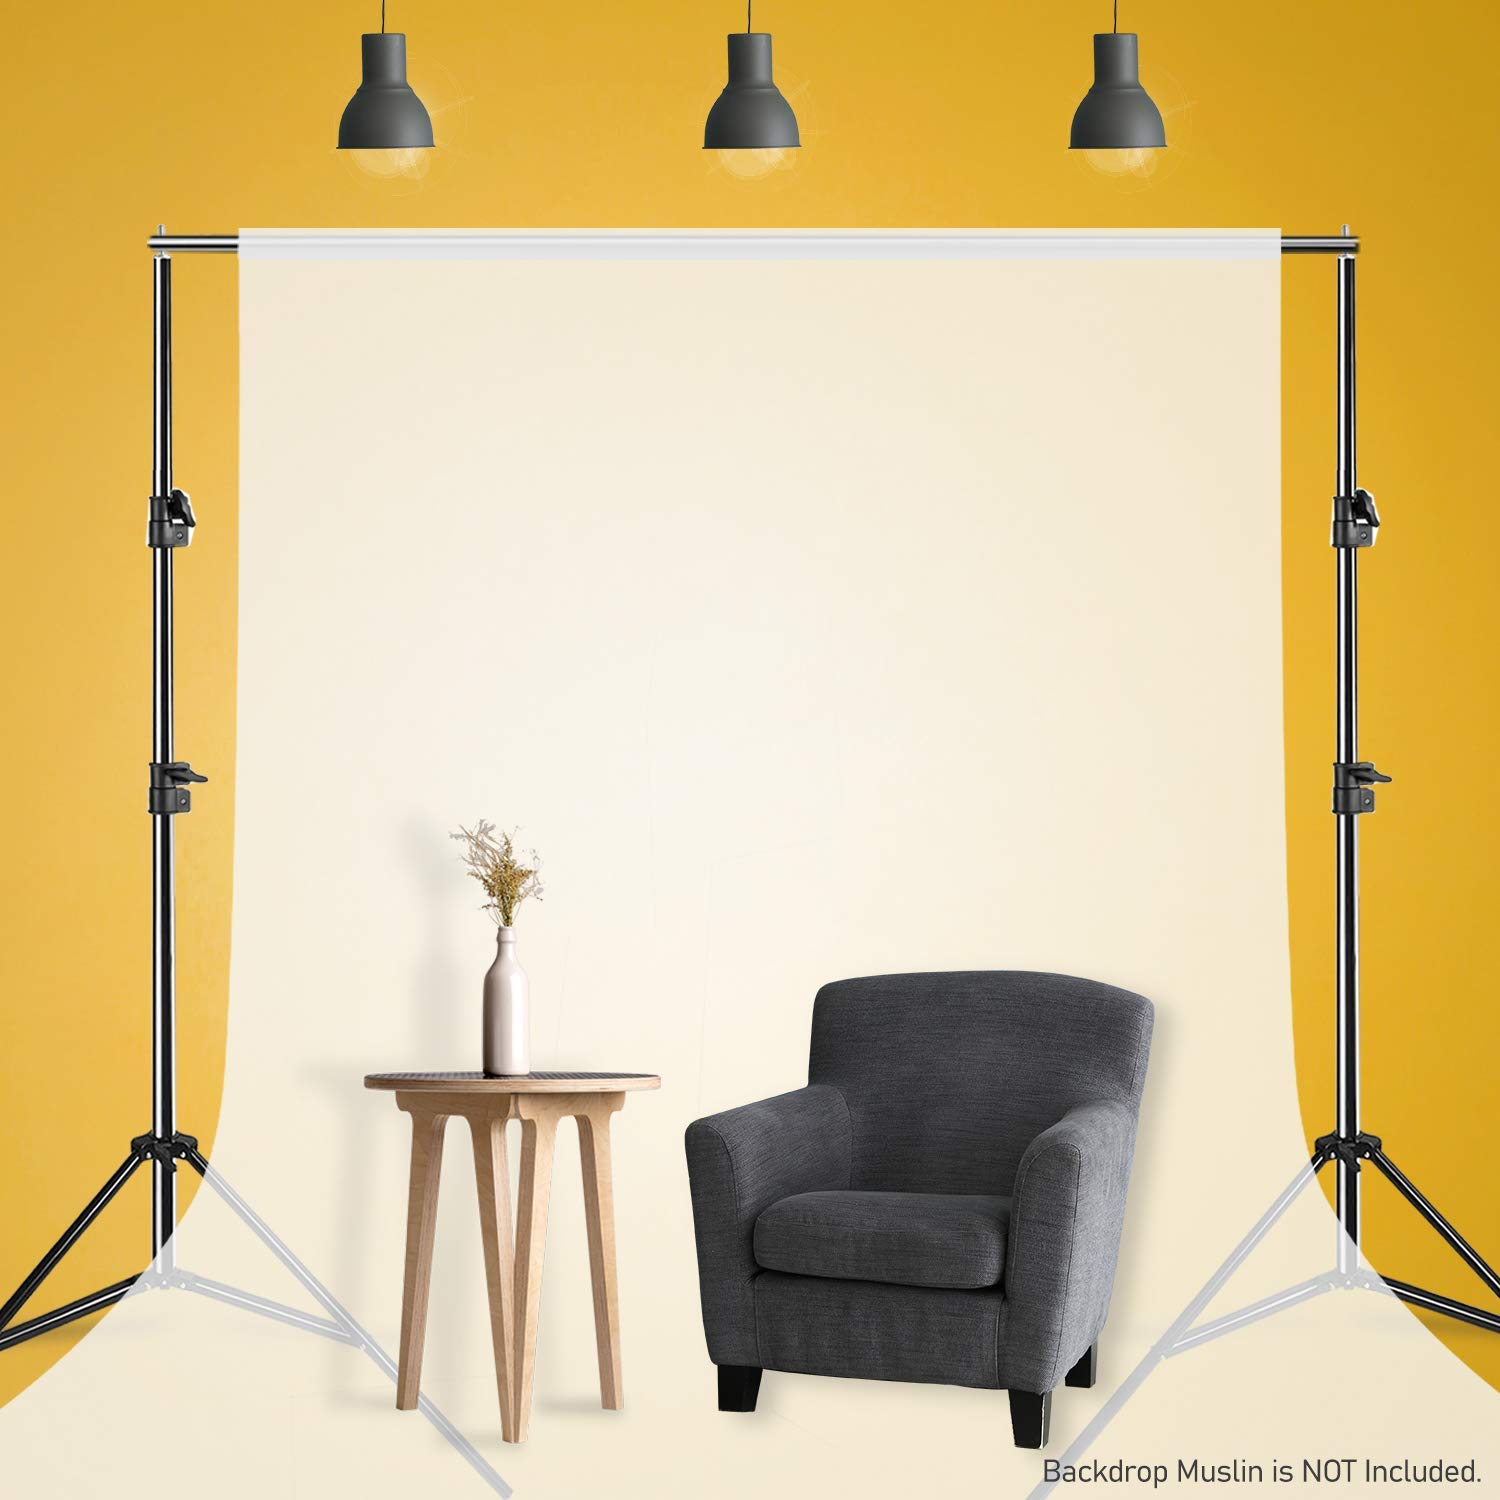 LS Photography 10 Feet Wide Photography Photo Muslin Background Support Stand Backdrop Crossbar Kit, Backdrop Support Stand with Carry Bag, WMT1143 - image 4 of 6